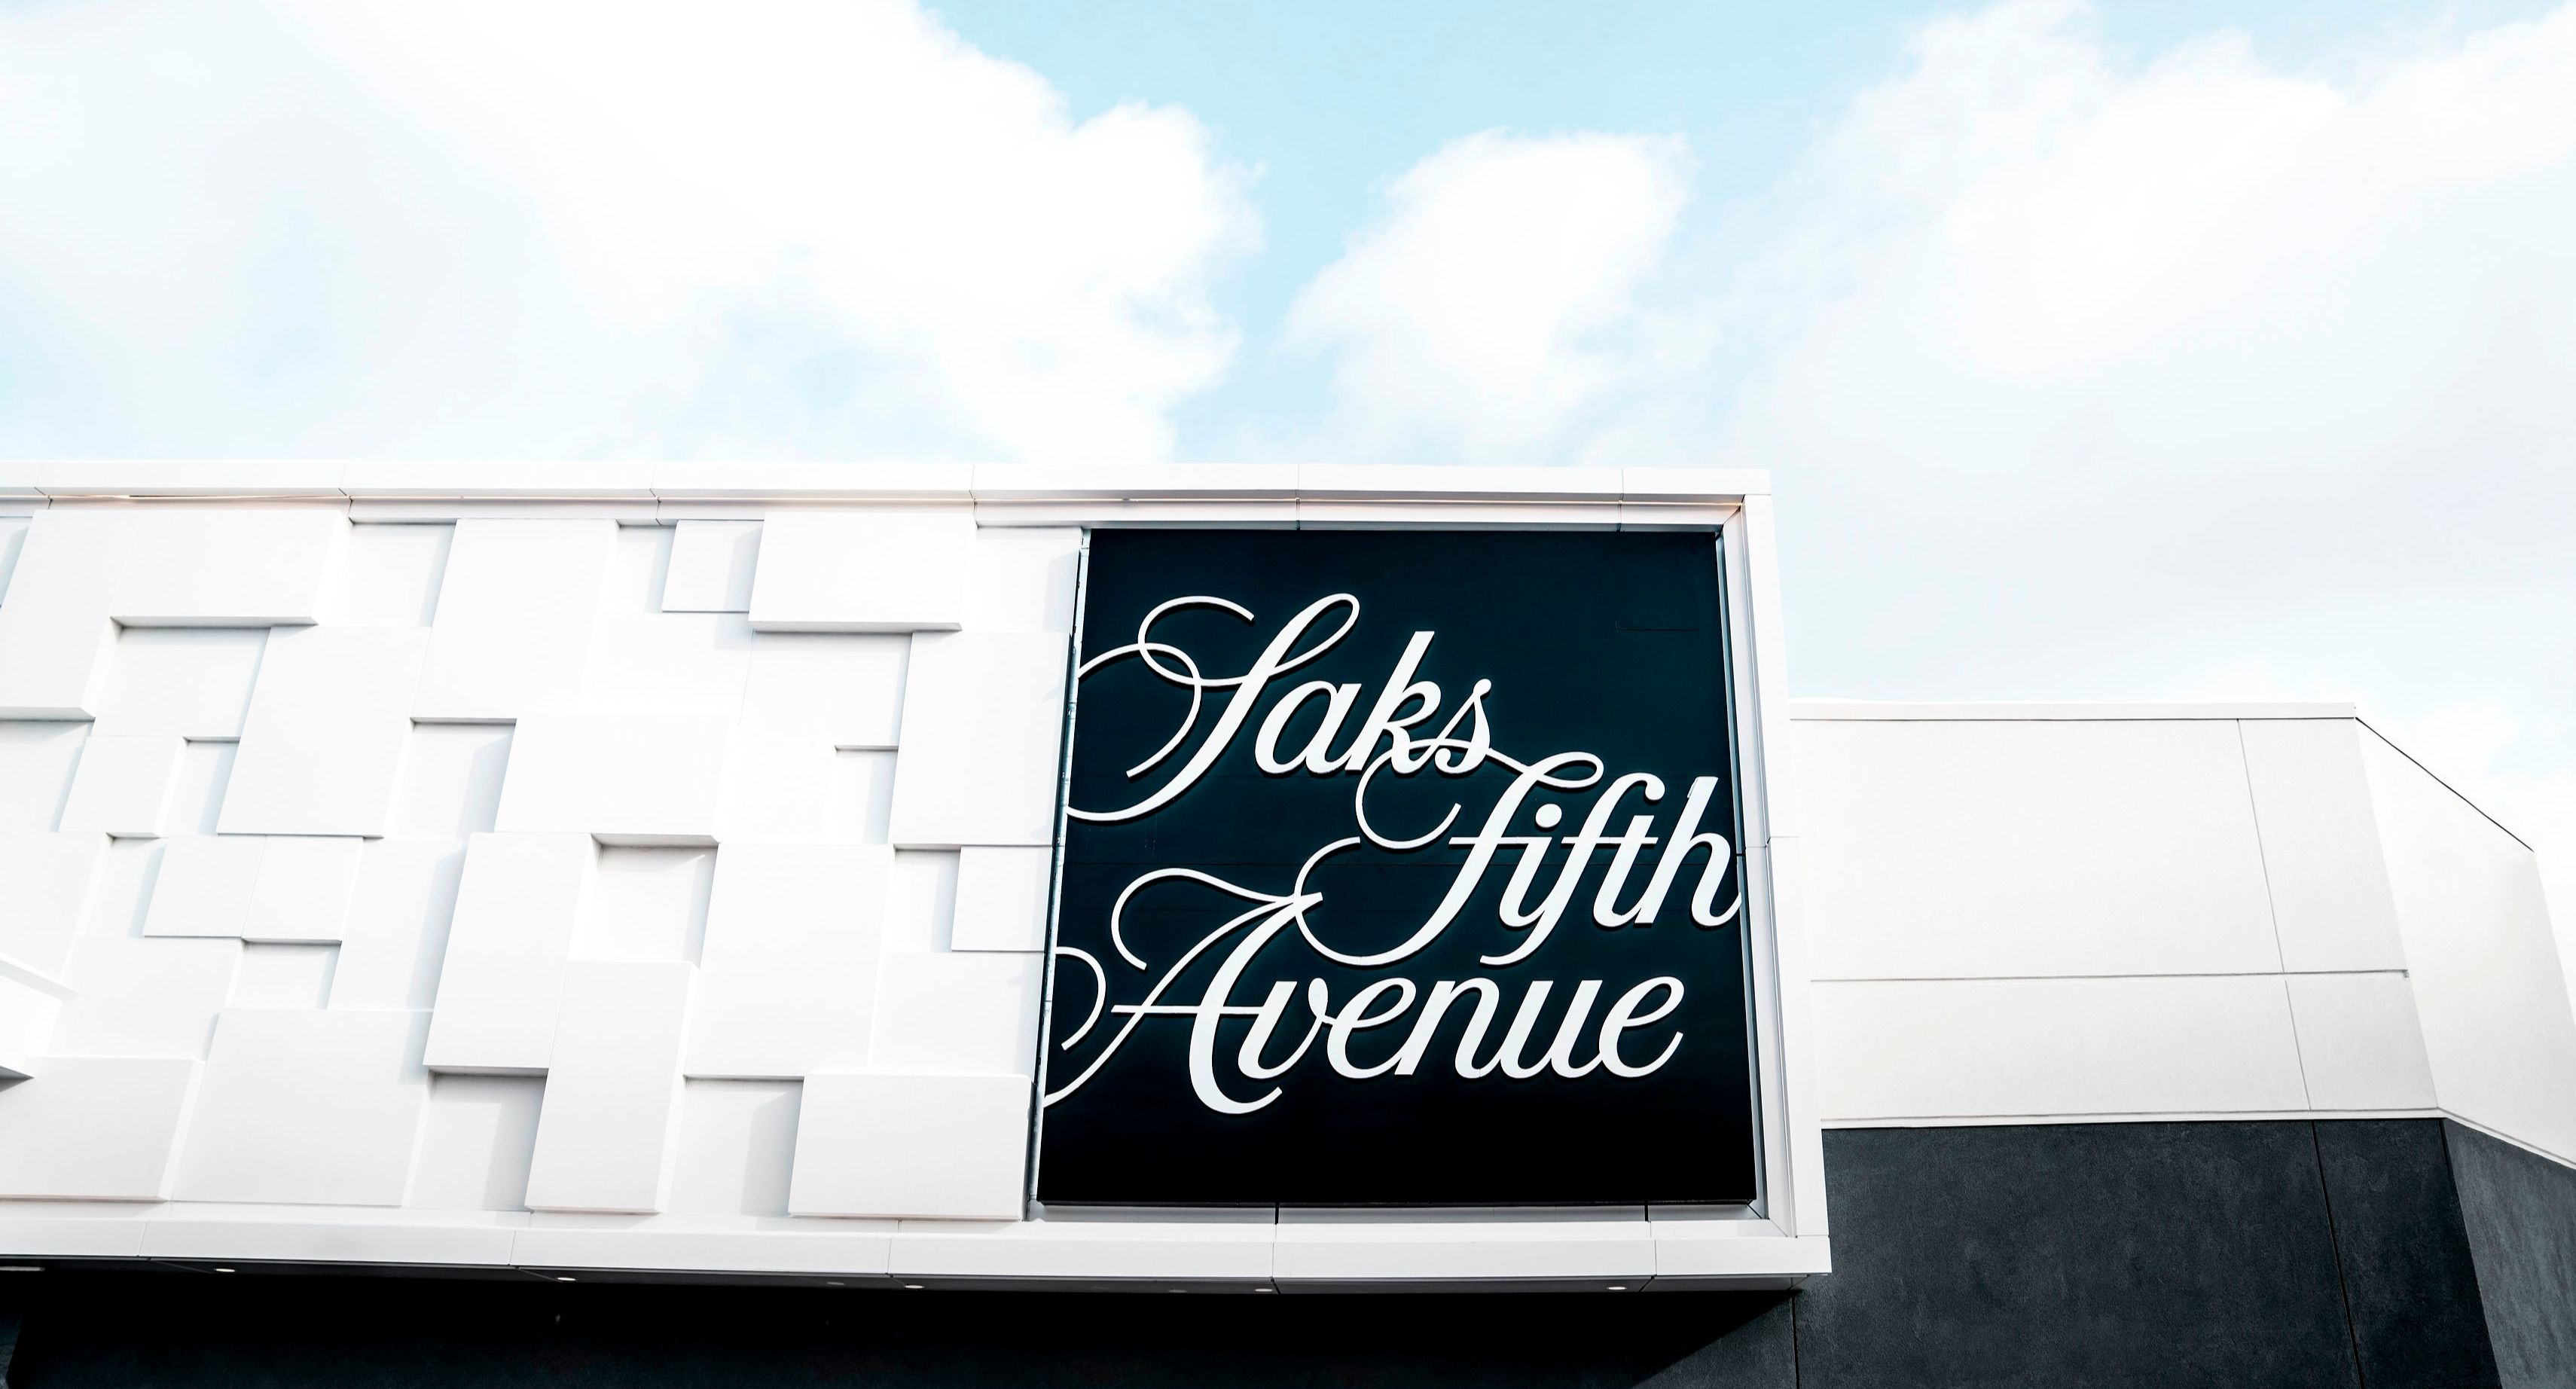 Saks Fifth Avenue opens in Canada